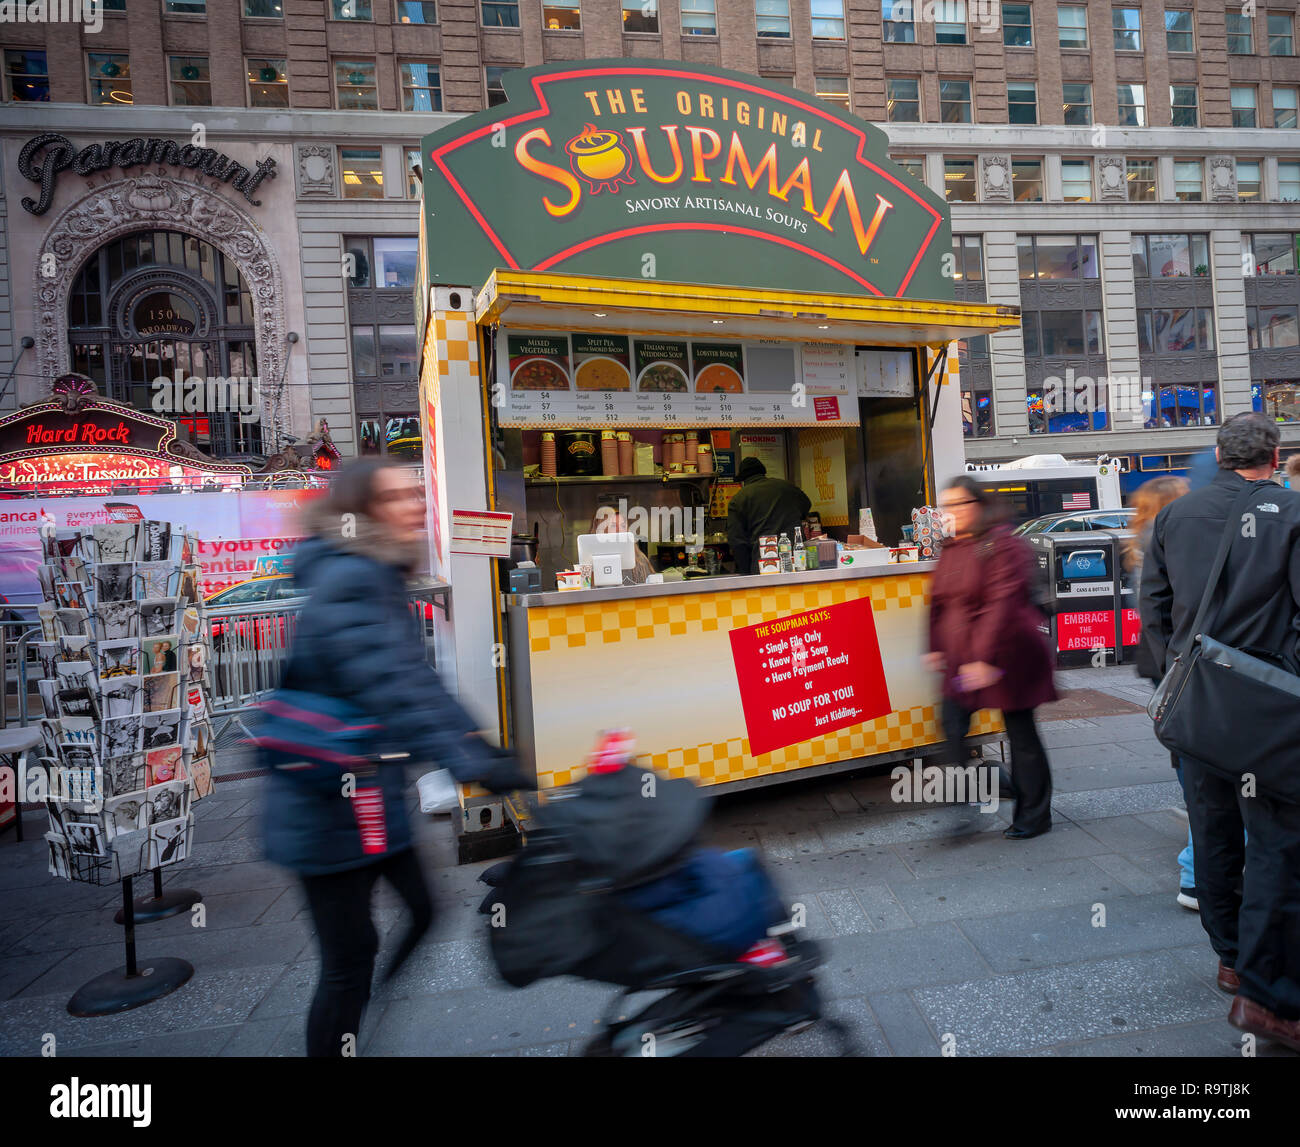 New York,NY/USA-December 17, 2018 The kiosk of the Original Soupman serves soup for you in Times Square in New York on Monday, December 17, 2018. The presence in Times Square is its first brick-and-mortar store since emerging from bankruptcy with new owners. The company also supplies New York City public schools and is available in many delis and supermarkets. (Â© Richard B. Levine) Stock Photo